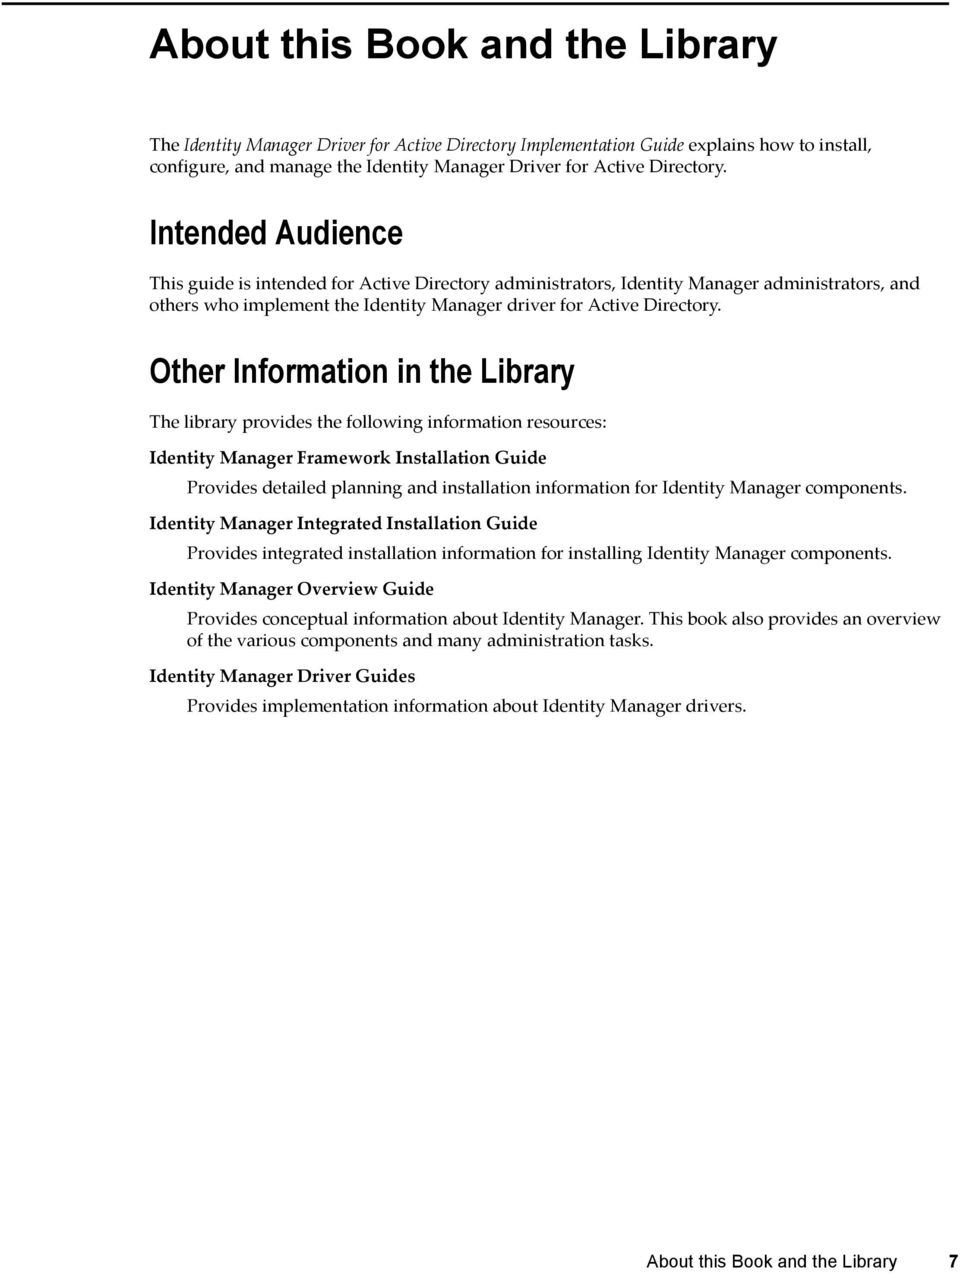 Other Information in the Library The library provides the following information resources: Identity Manager Framework Installation Guide Provides detailed planning and installation information for